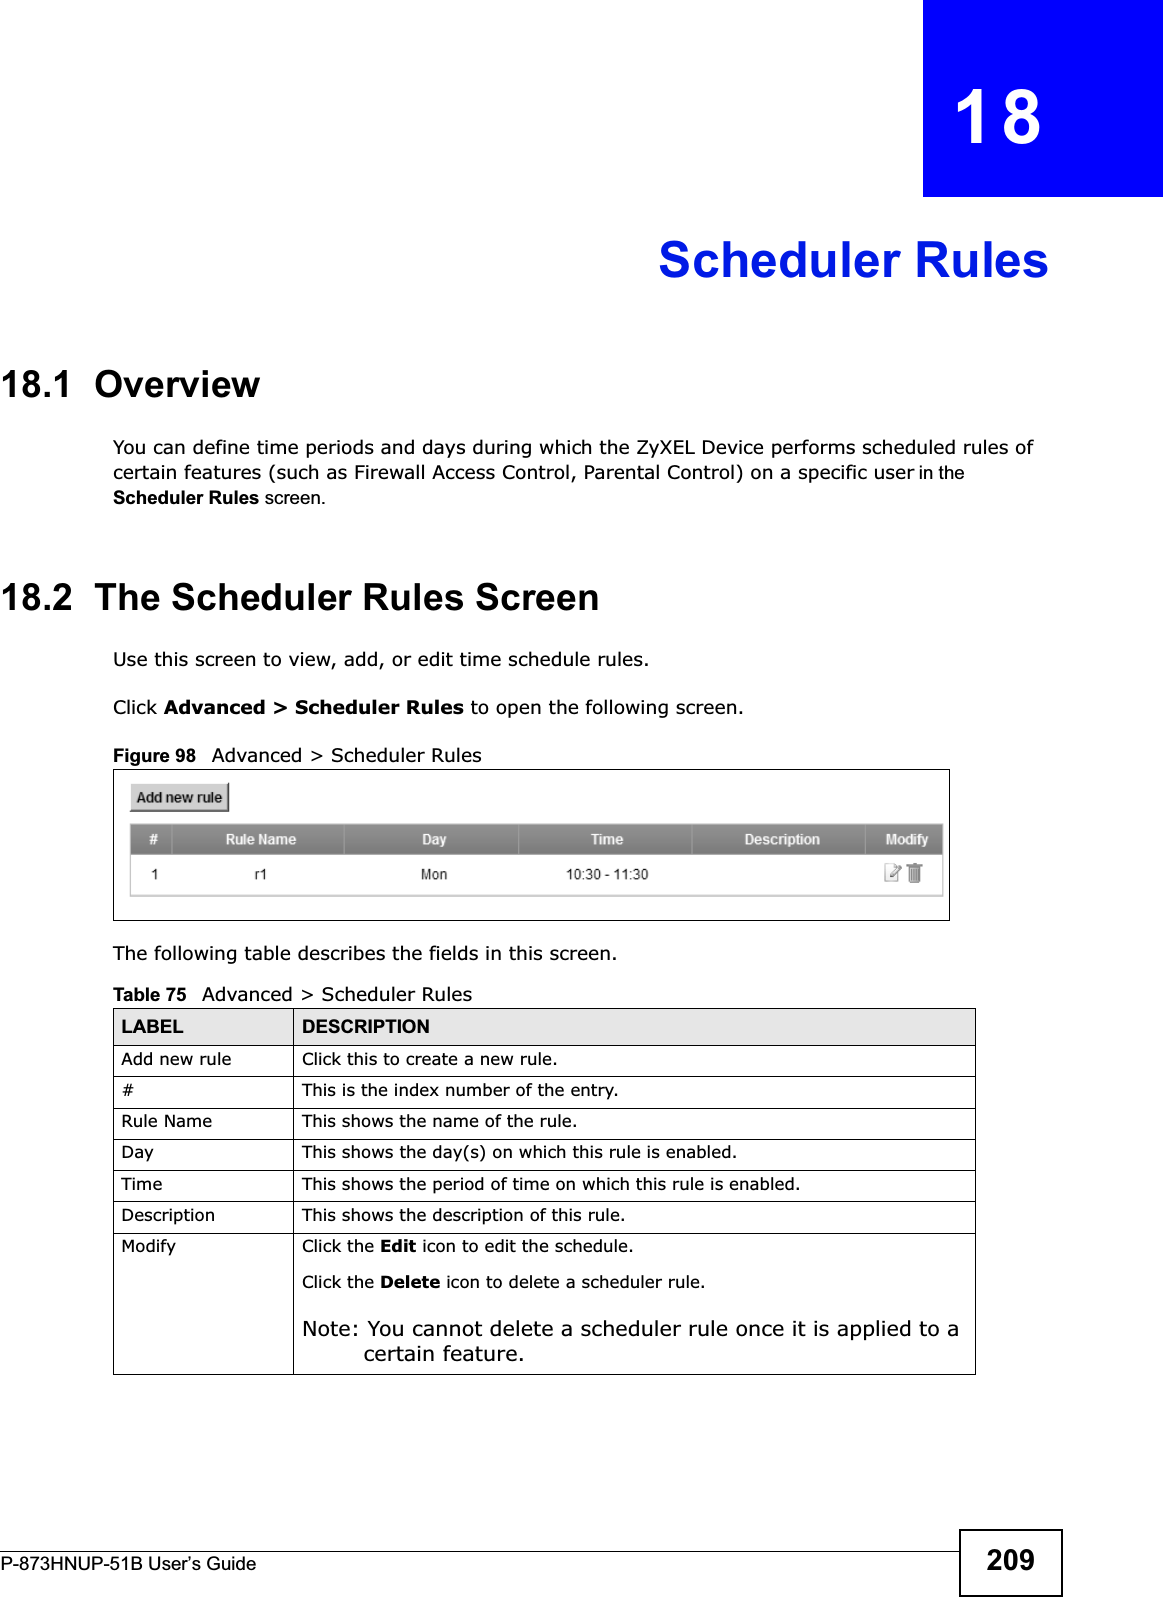 P-873HNUP-51B User’s Guide 209CHAPTER   18Scheduler Rules18.1  OverviewYou can define time periods and days during which the ZyXEL Device performs scheduled rules of certain features (such as Firewall Access Control, Parental Control) on a specific user in the Scheduler Rules screen. 18.2  The Scheduler Rules ScreenUse this screen to view, add, or edit time schedule rules.Click Advanced &gt; Scheduler Rules to open the following screen. Figure 98   Advanced &gt; Scheduler Rules The following table describes the fields in this screen. Table 75   Advanced &gt; Scheduler RulesLABEL DESCRIPTIONAdd new rule Click this to create a new rule.#This is the index number of the entry.Rule Name This shows the name of the rule.Day This shows the day(s) on which this rule is enabled.Time This shows the period of time on which this rule is enabled.Description This shows the description of this rule.Modify Click the Edit icon to edit the schedule.Click the Delete icon to delete a scheduler rule.Note: You cannot delete a scheduler rule once it is applied to a certain feature.